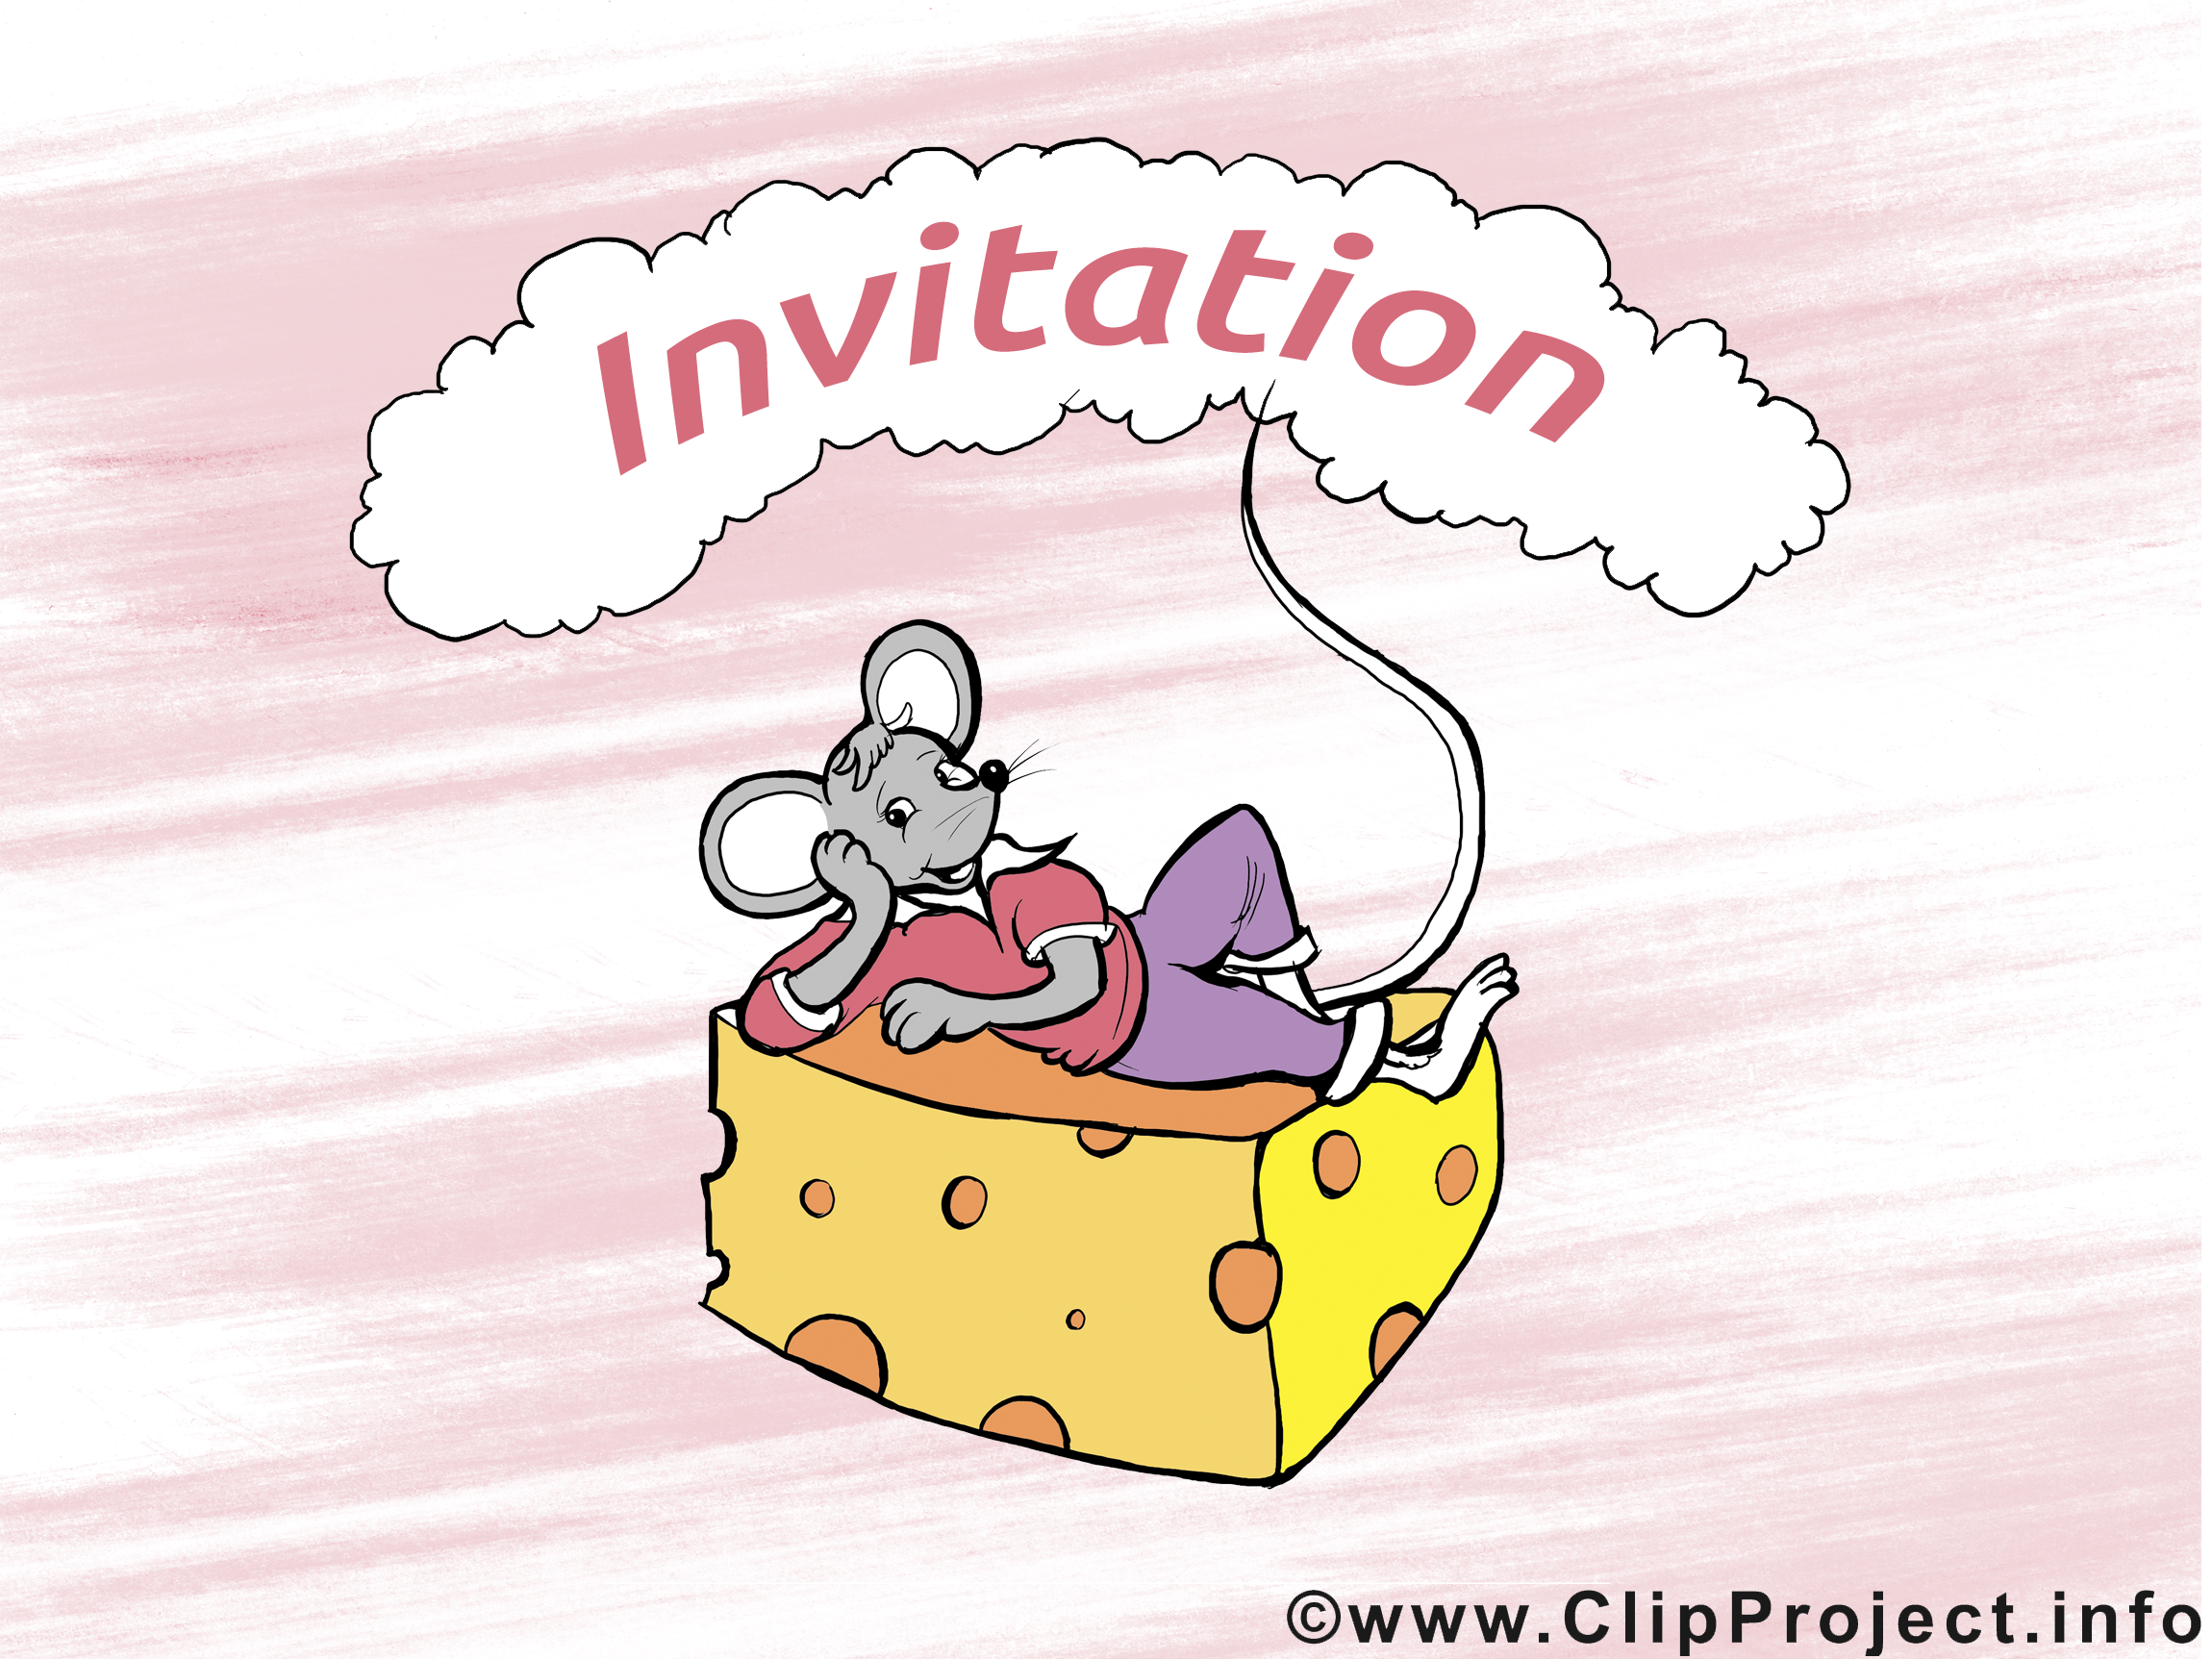 Fromage souris image - Invitation images cliparts